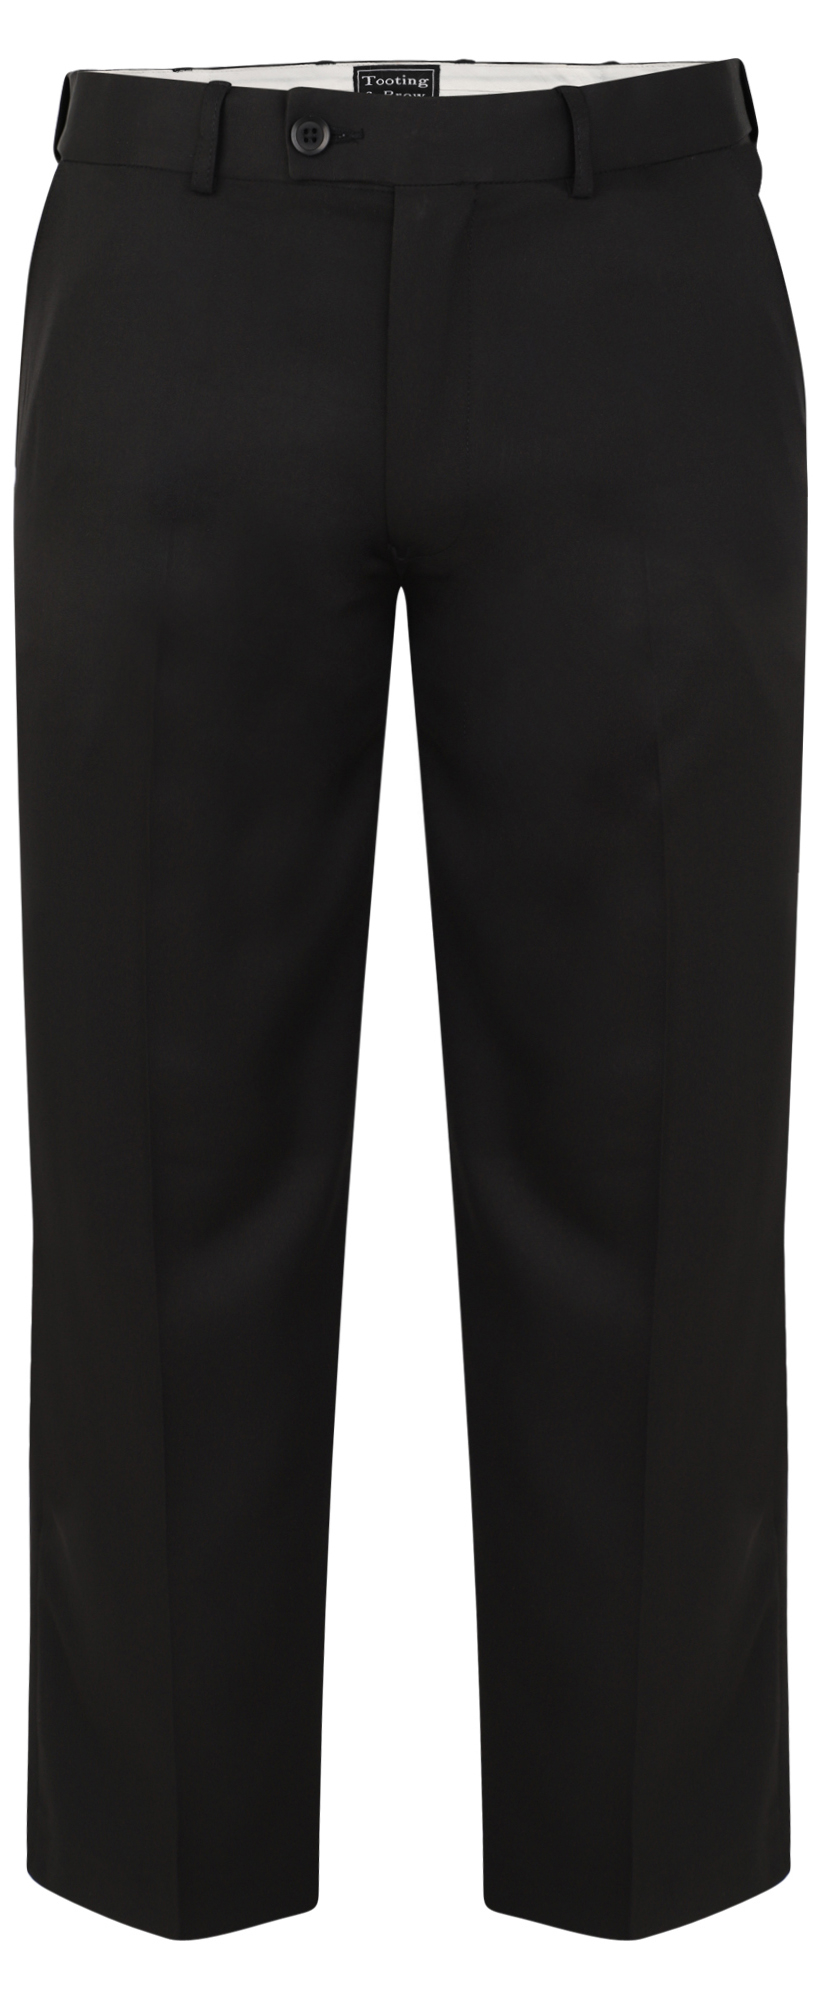 Elasticated Waist Trousers at Cotton Traders